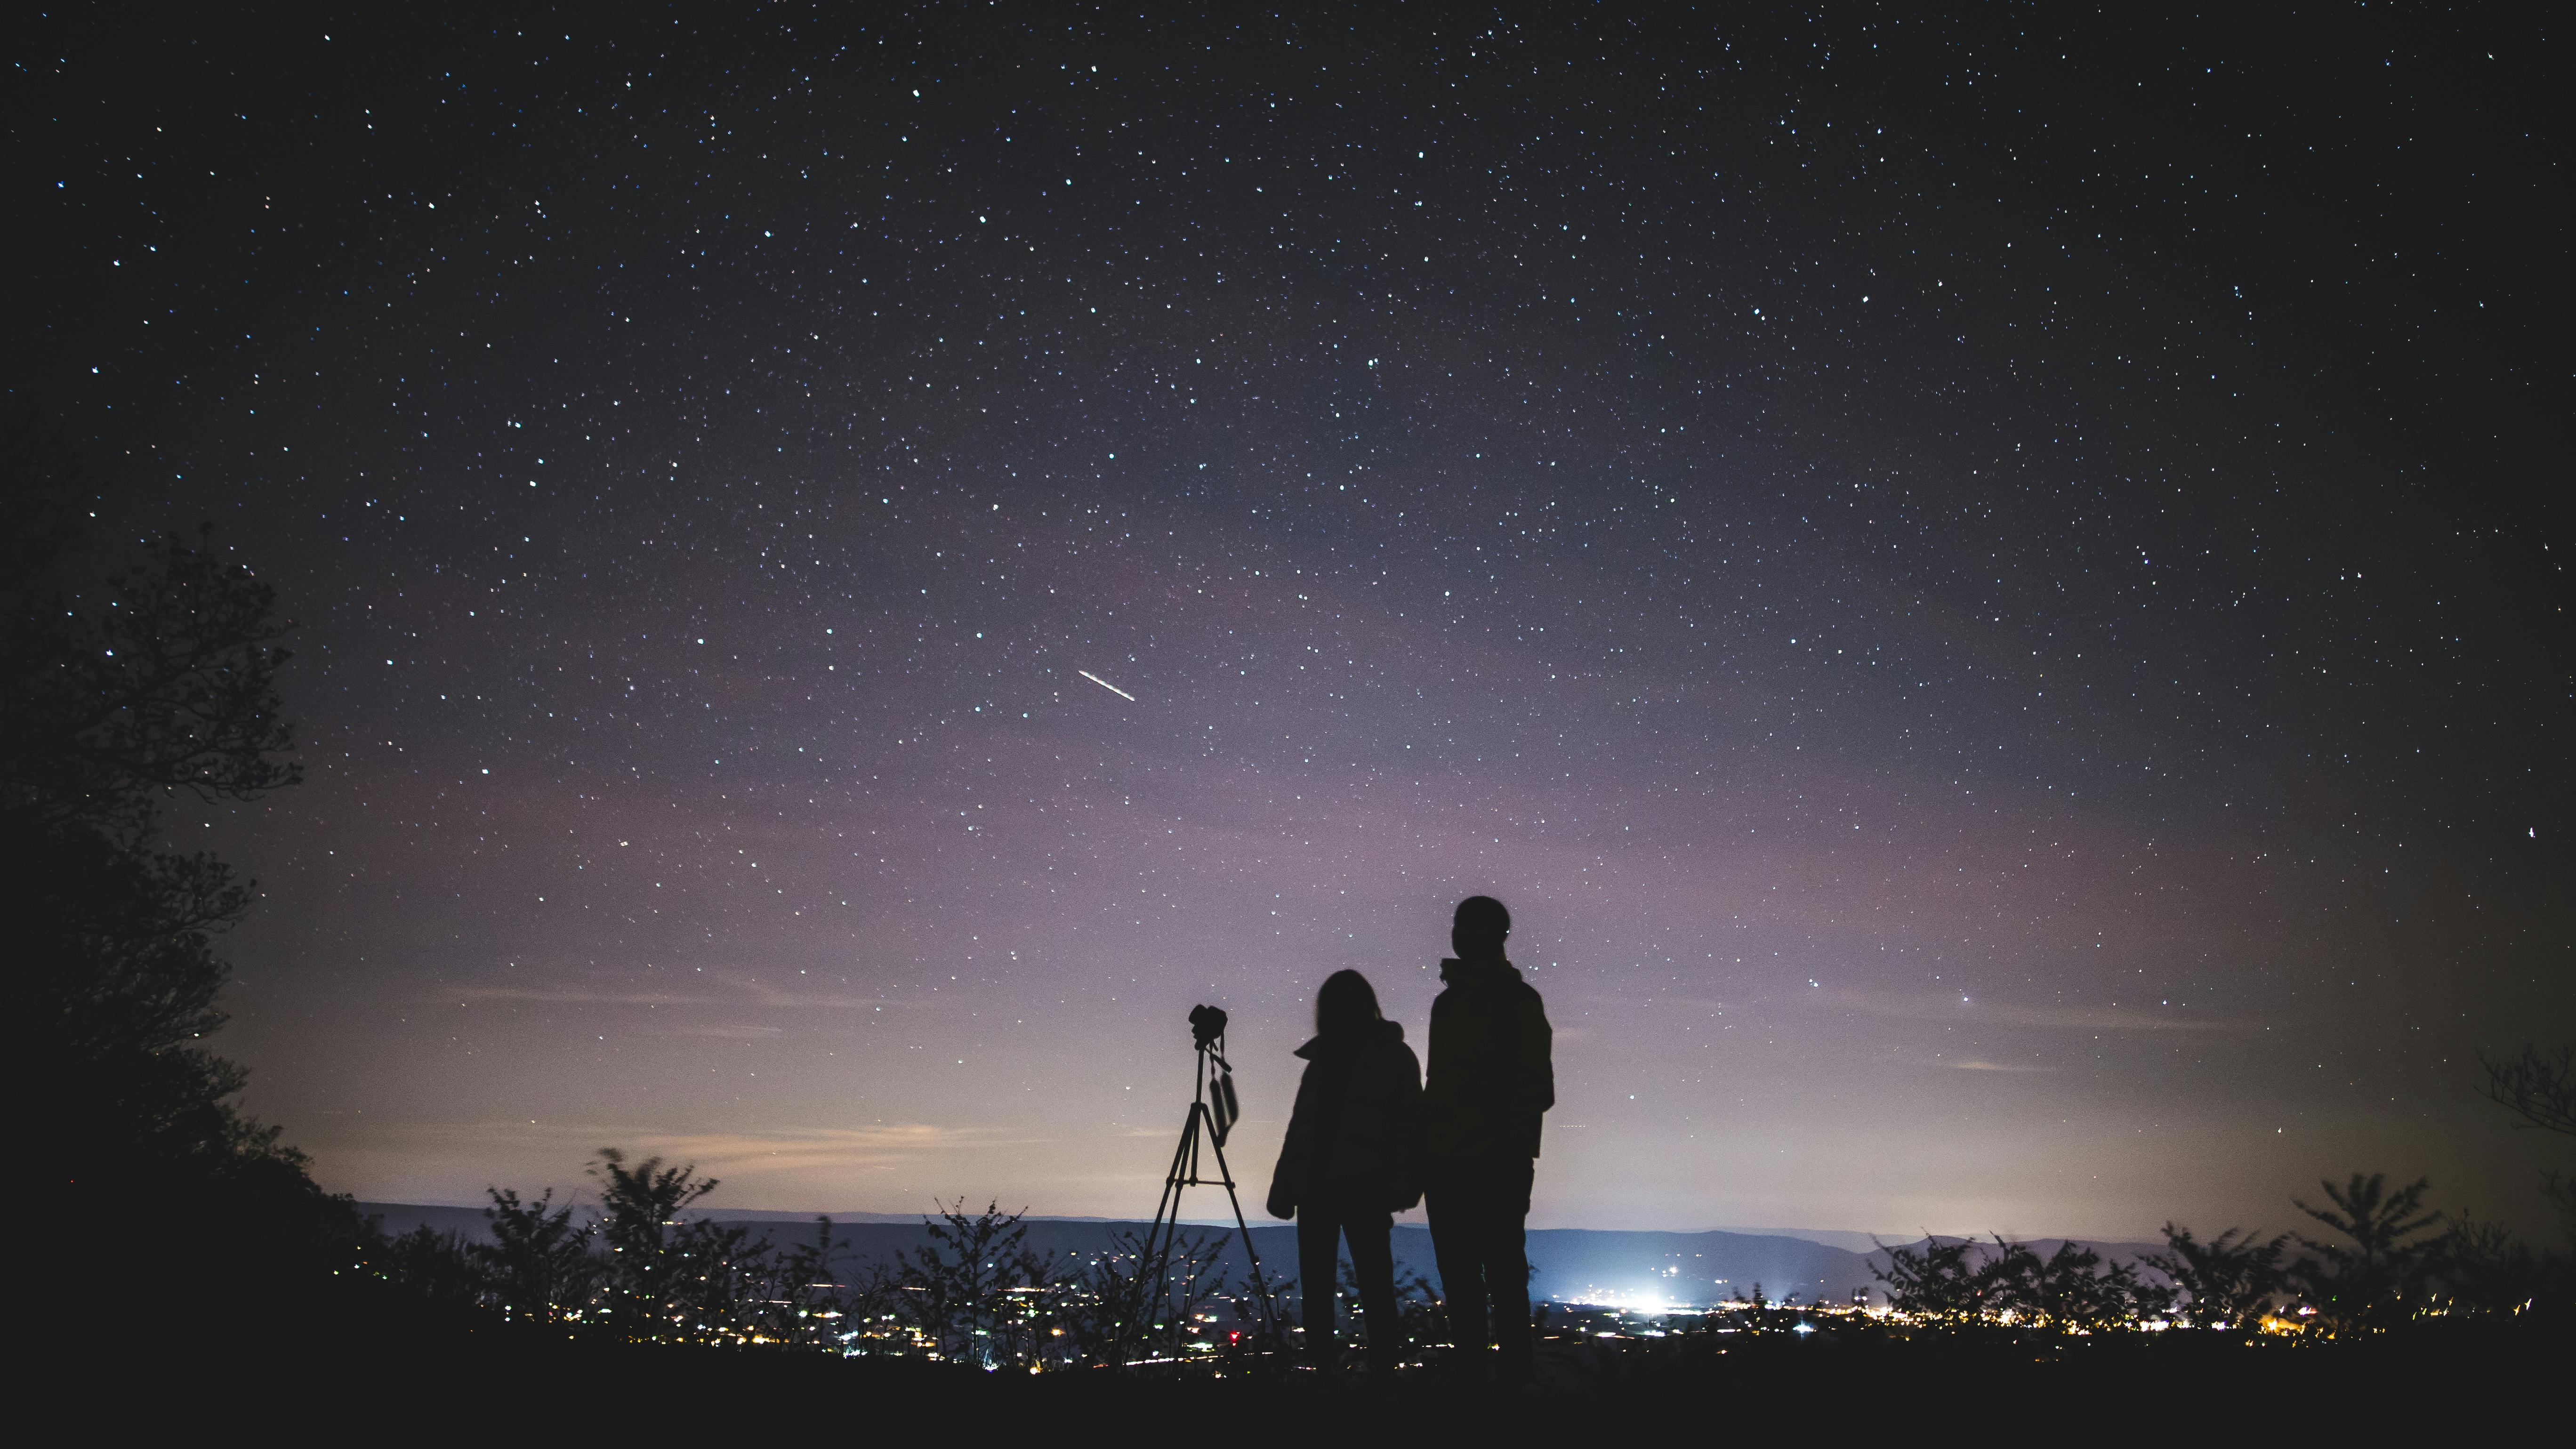 A couple looking at the stars | Source: Pexels